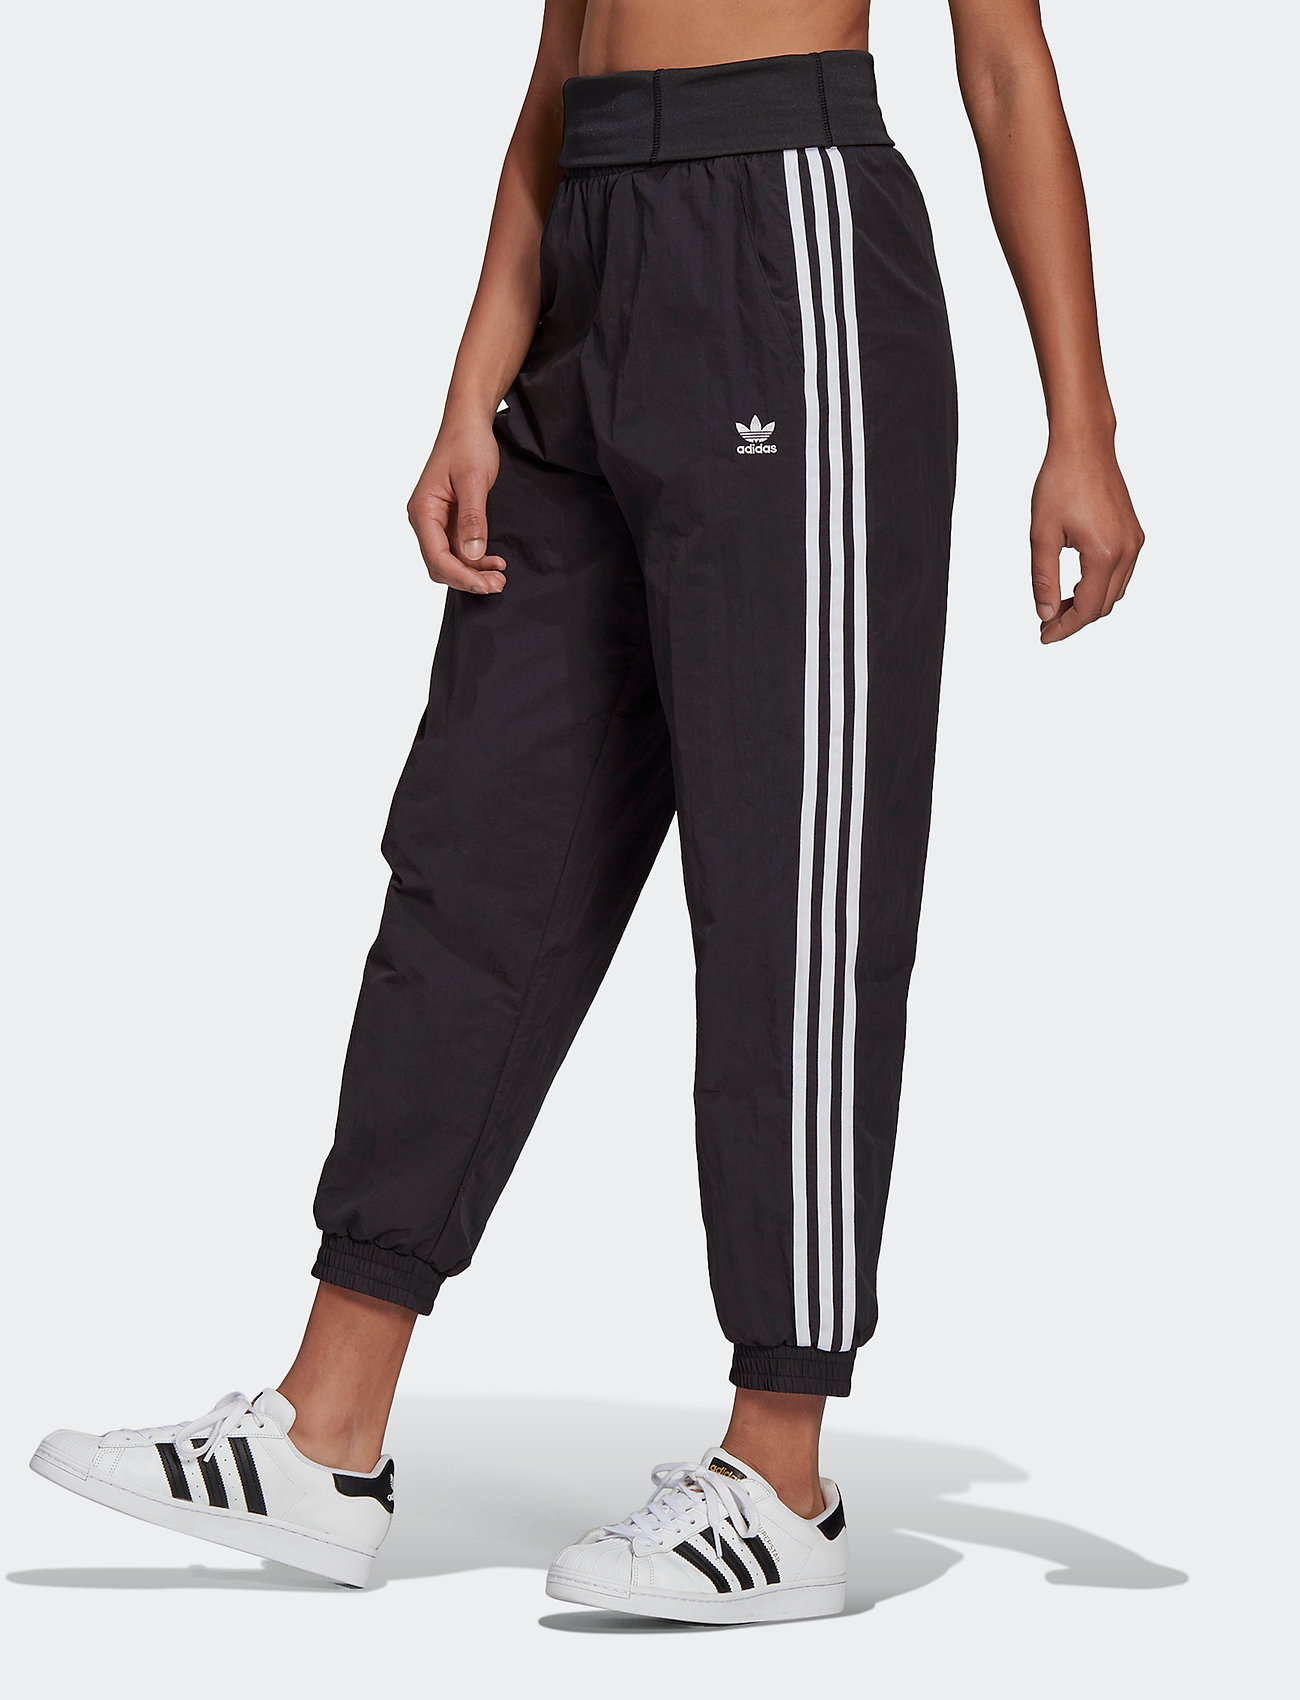 Buy > adidas track pants > in stock